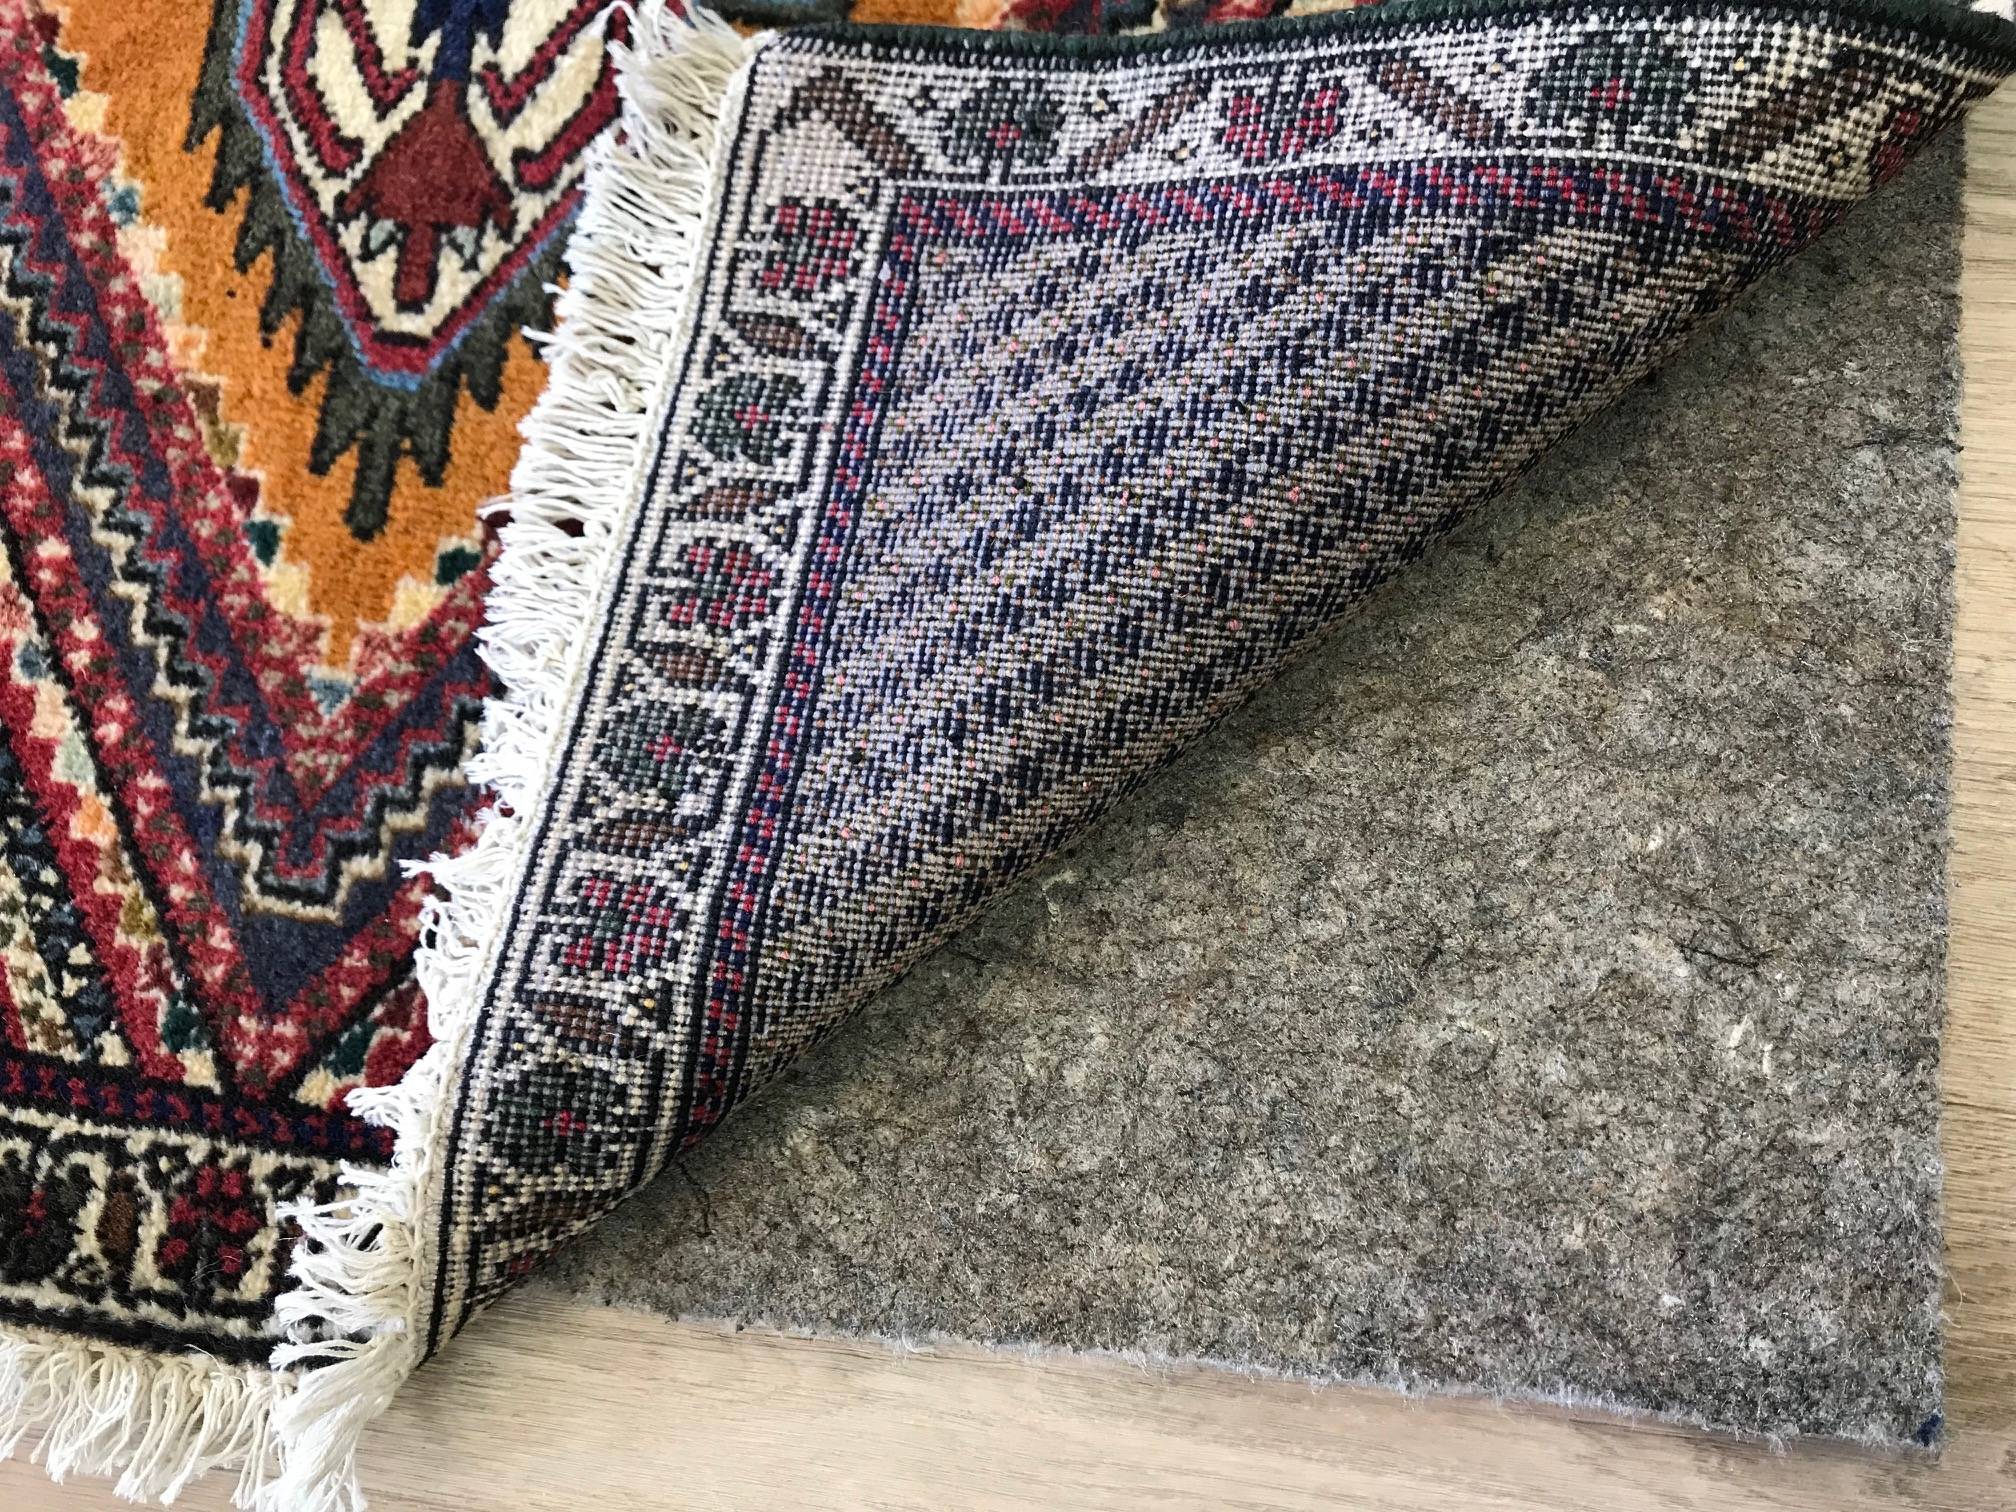 Rug Pads - Protect your floors and Oriental rugs